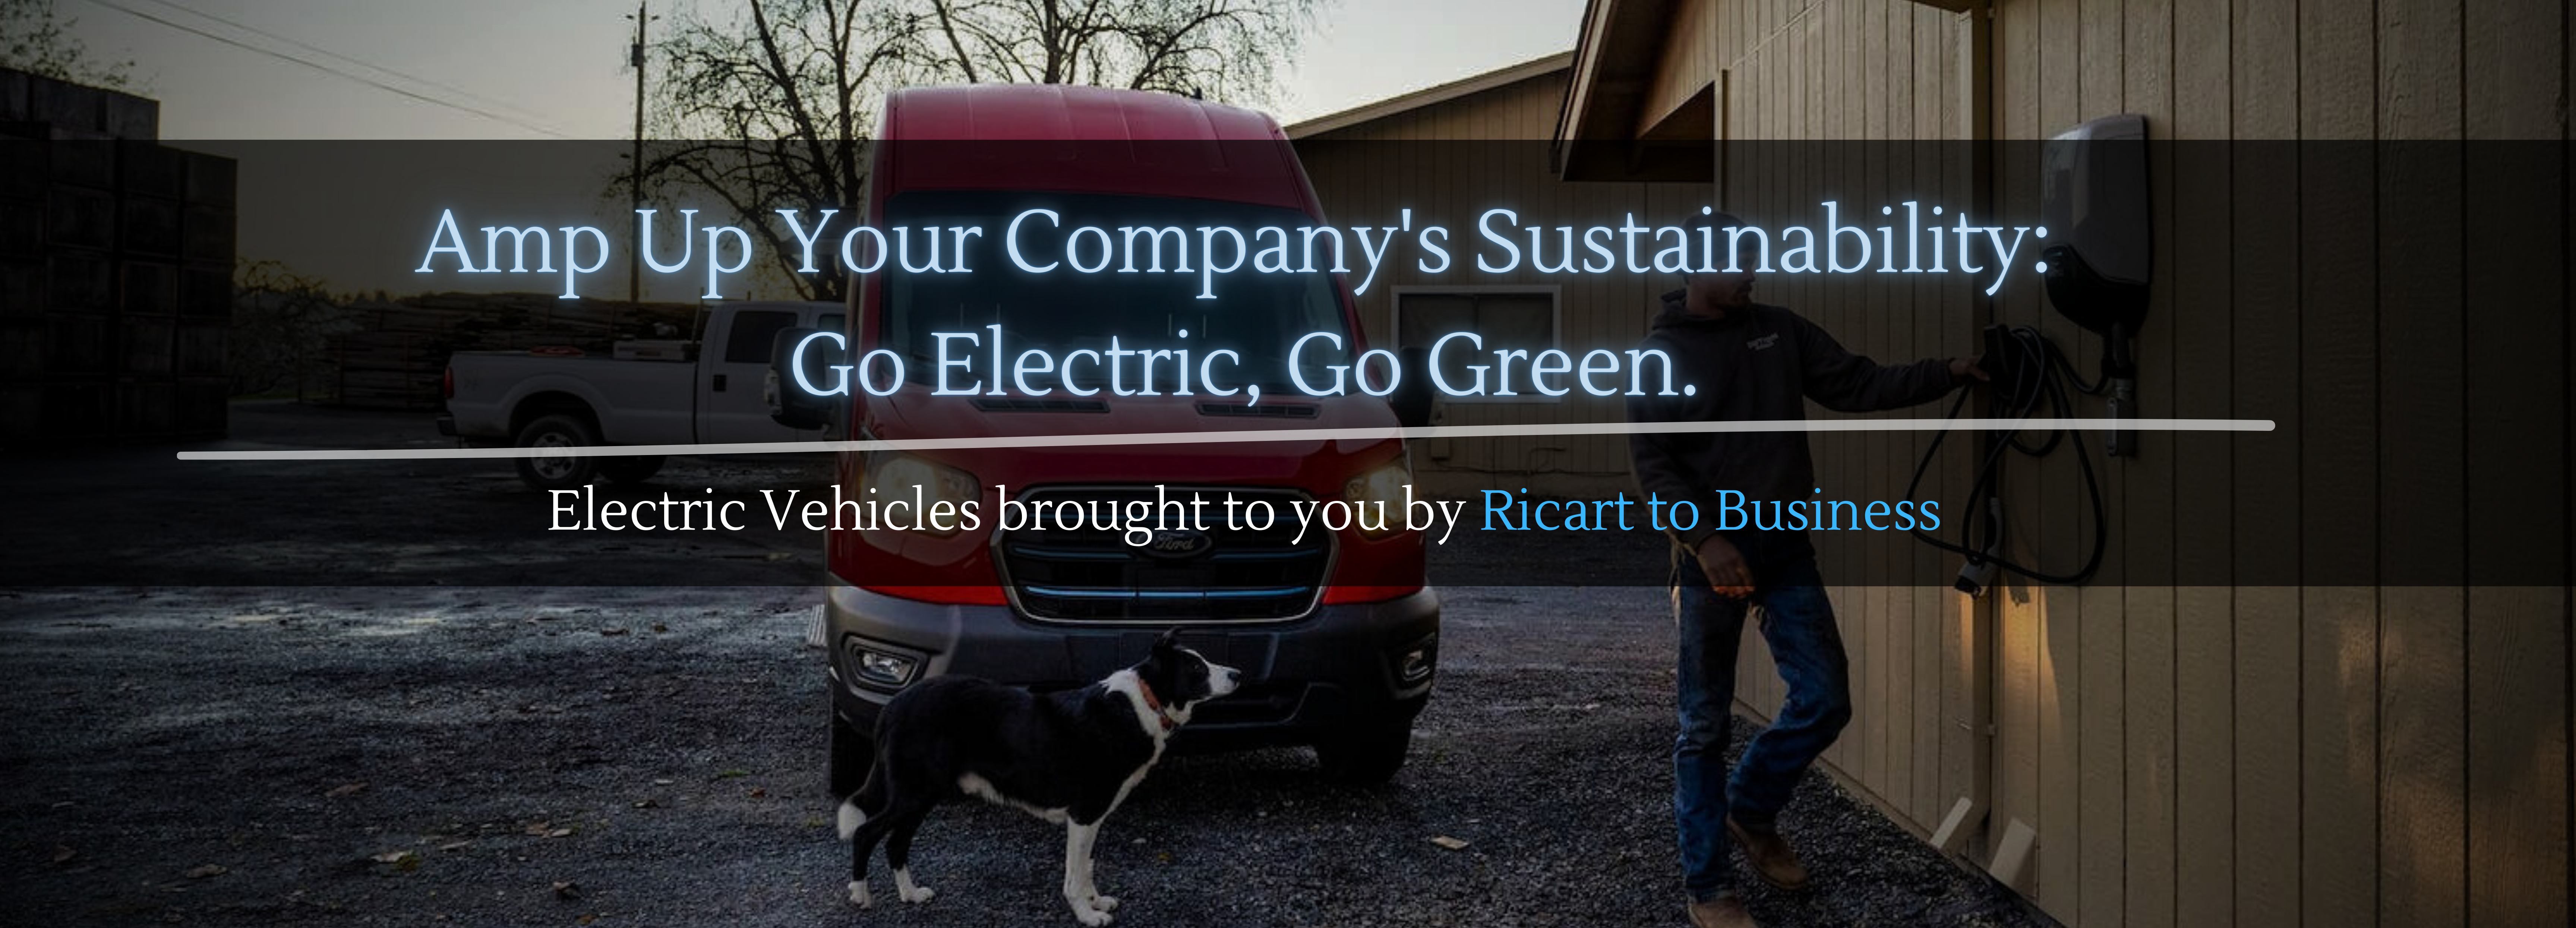 Electric Powered by Ricart; Electric vehicles brought to you by Ricart to Business.